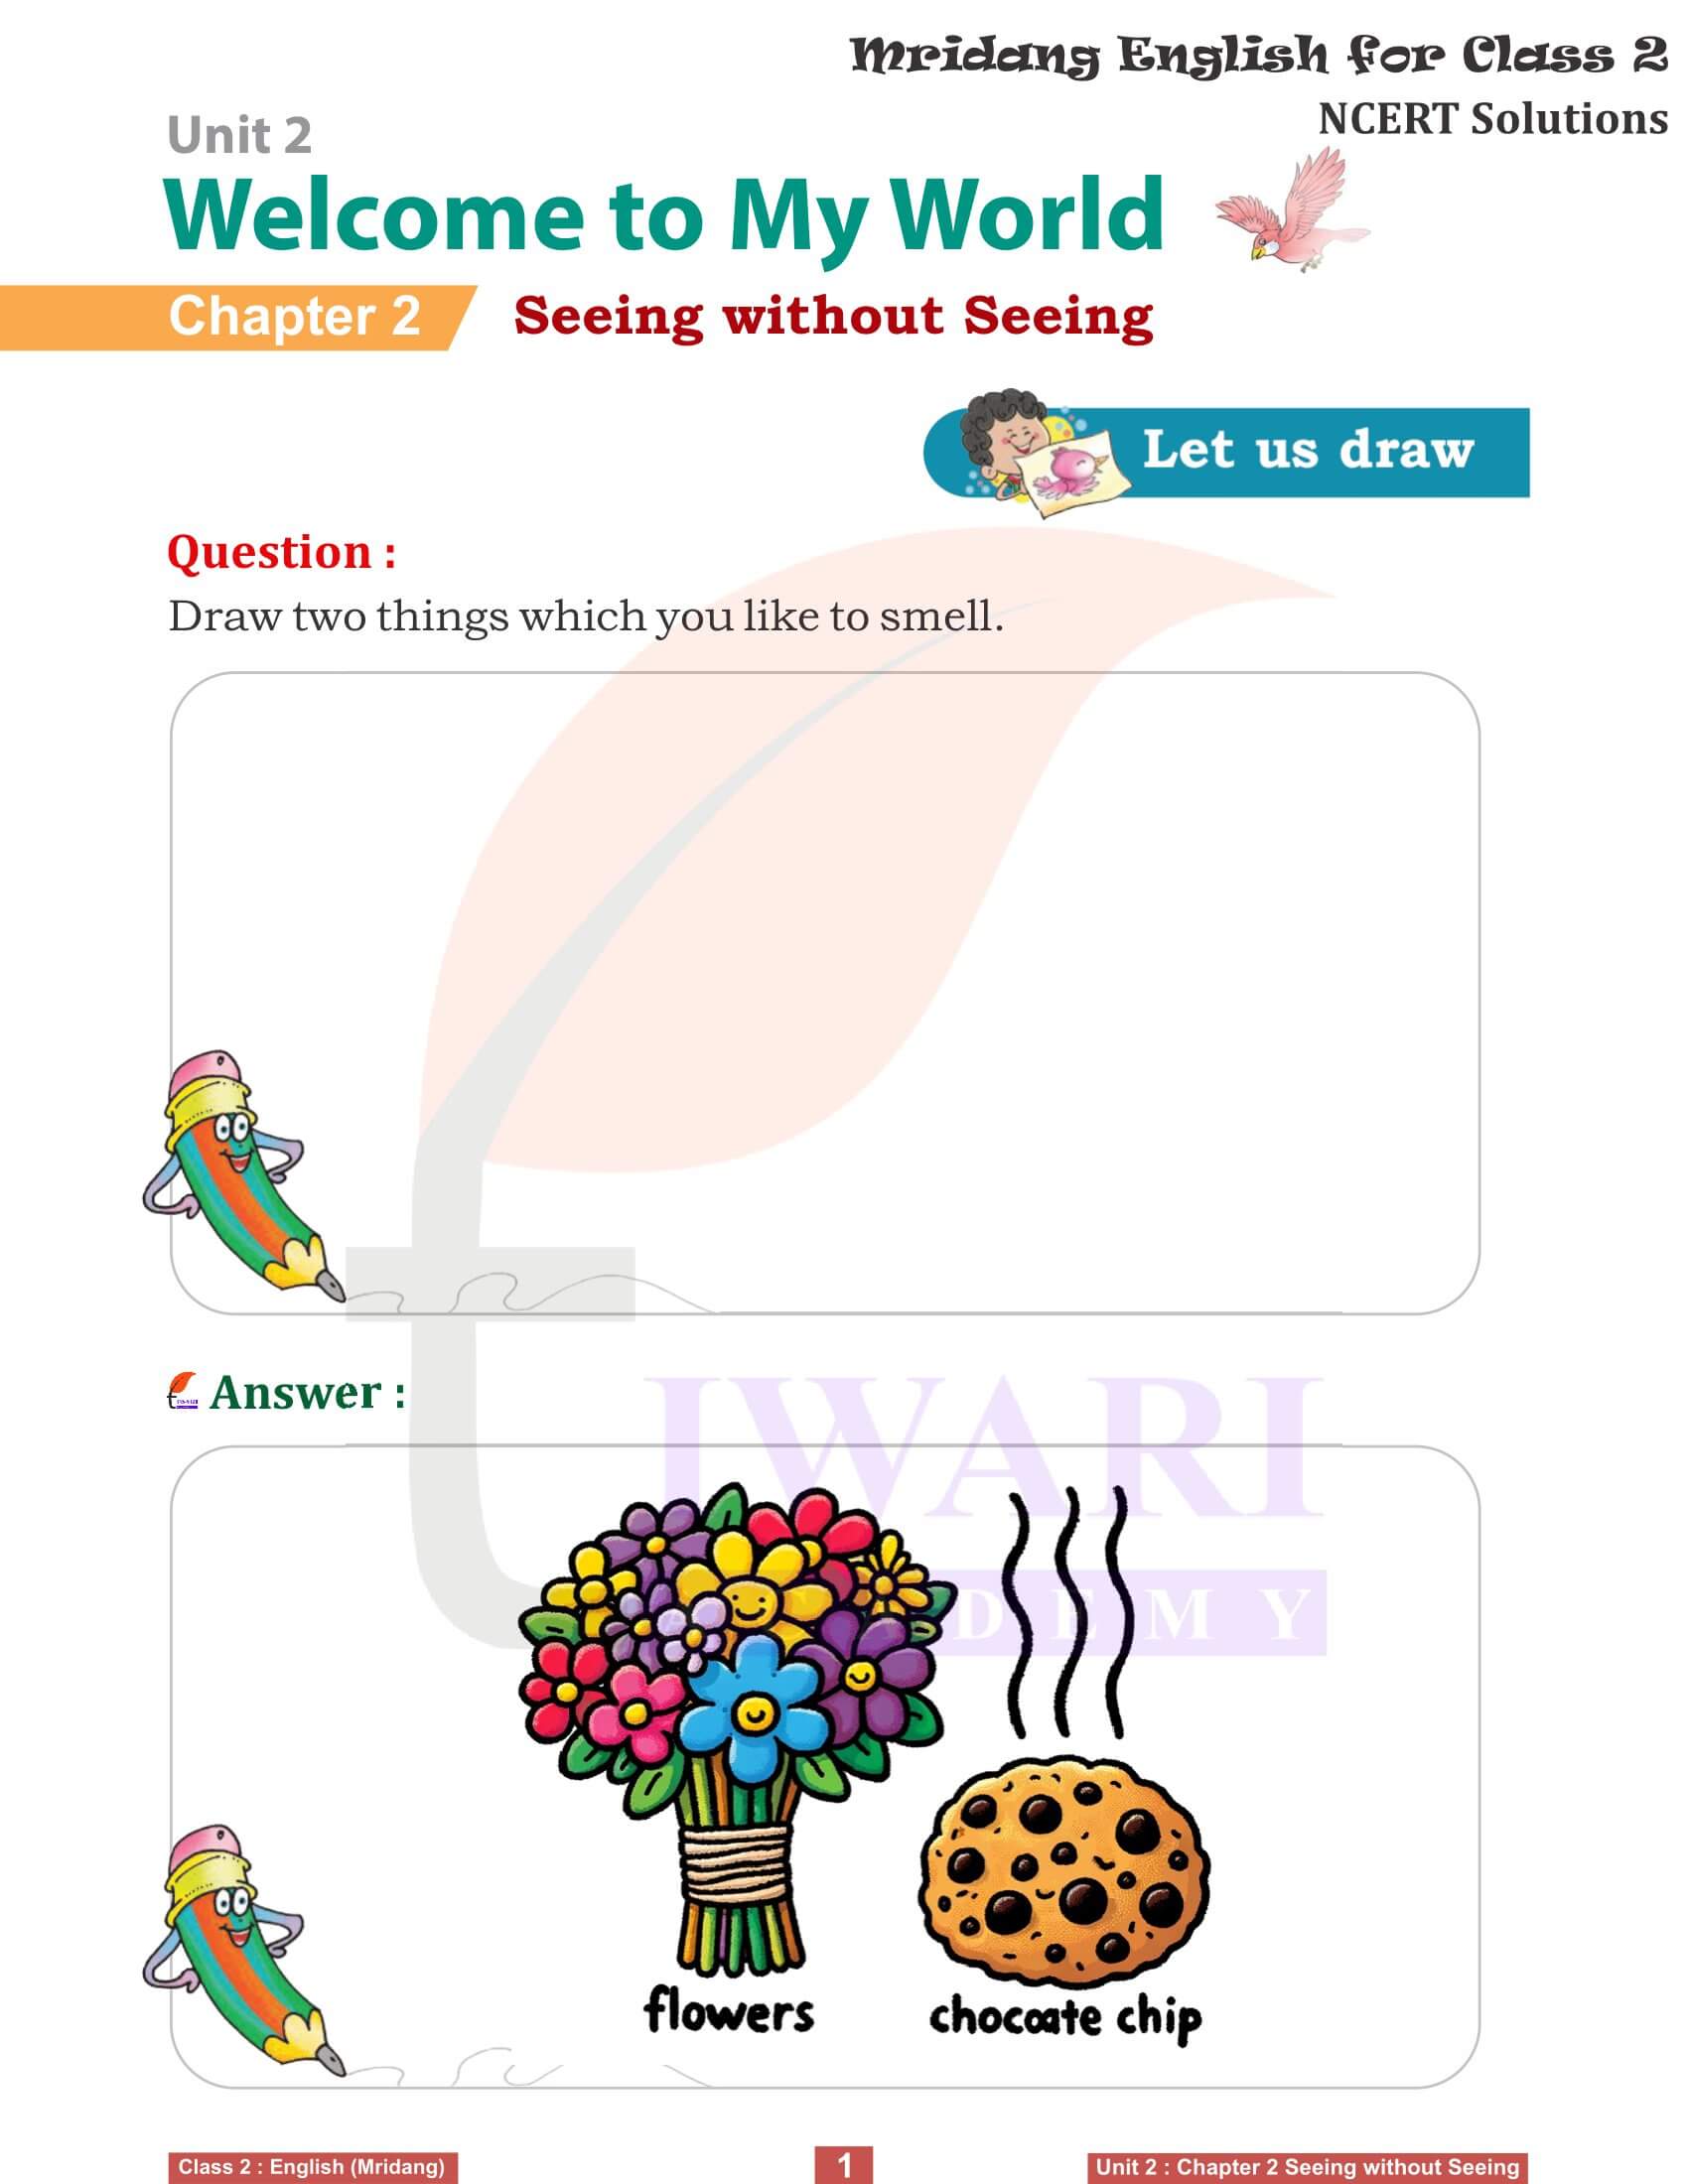 NCERT Solutions for Class 2 English Mridang Unit 2 Welcome to My World Chapter 2 Seeing without Seeing